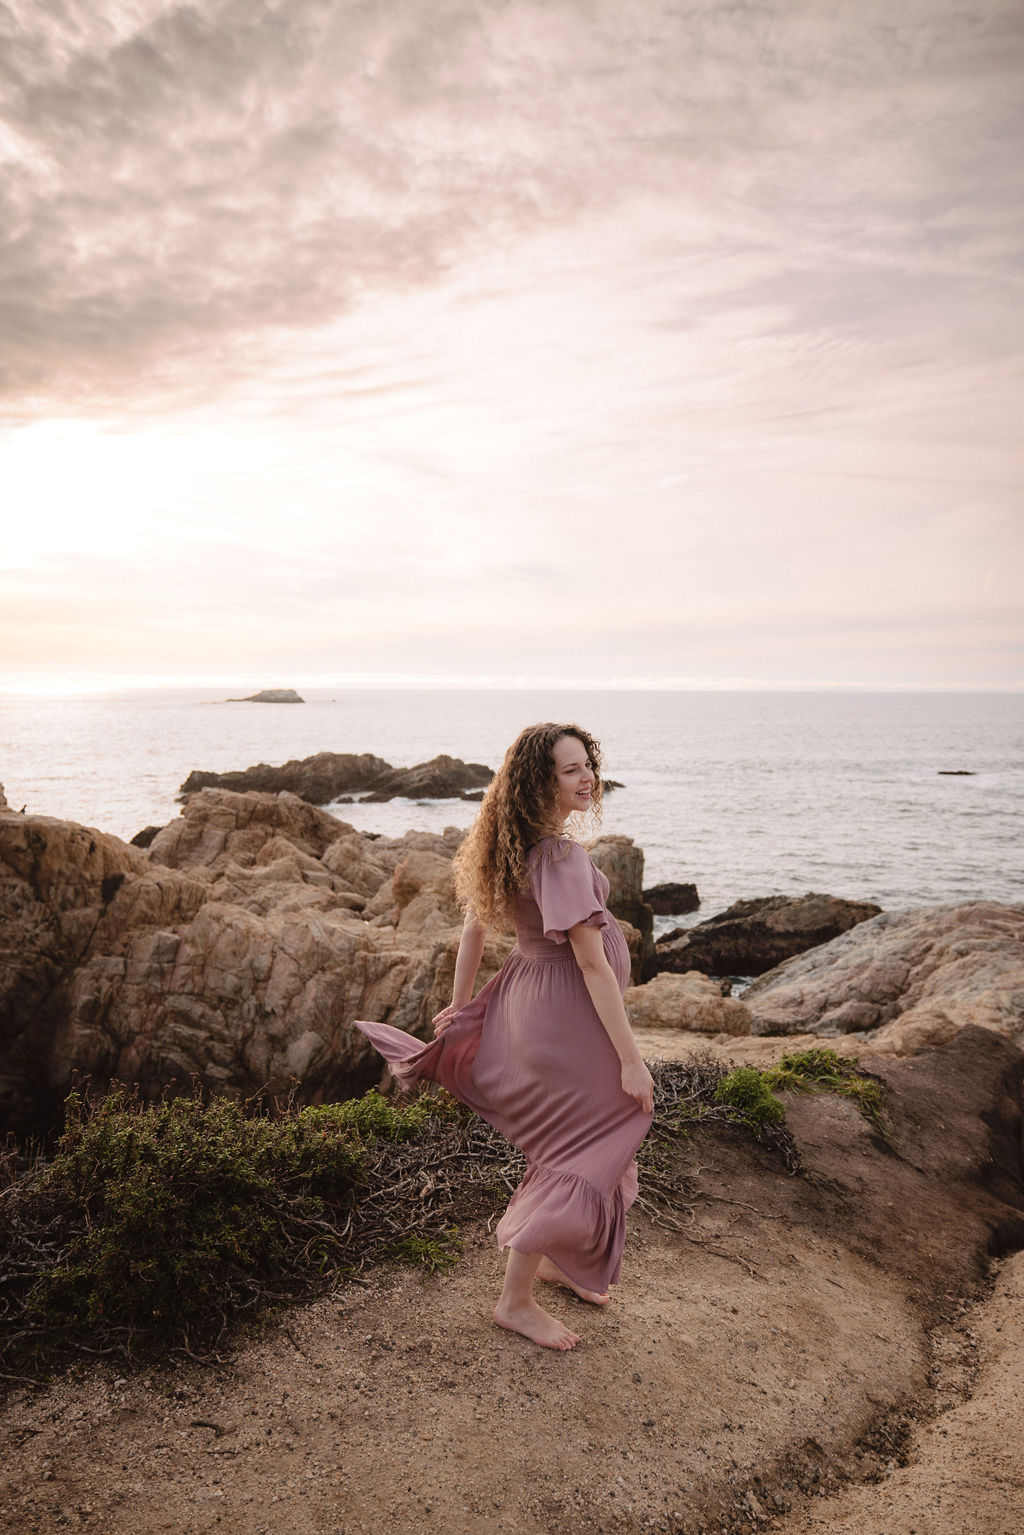 Pregnant woman in a pink dress standing by the seaside with hills in the background to capture her beach maternity photos